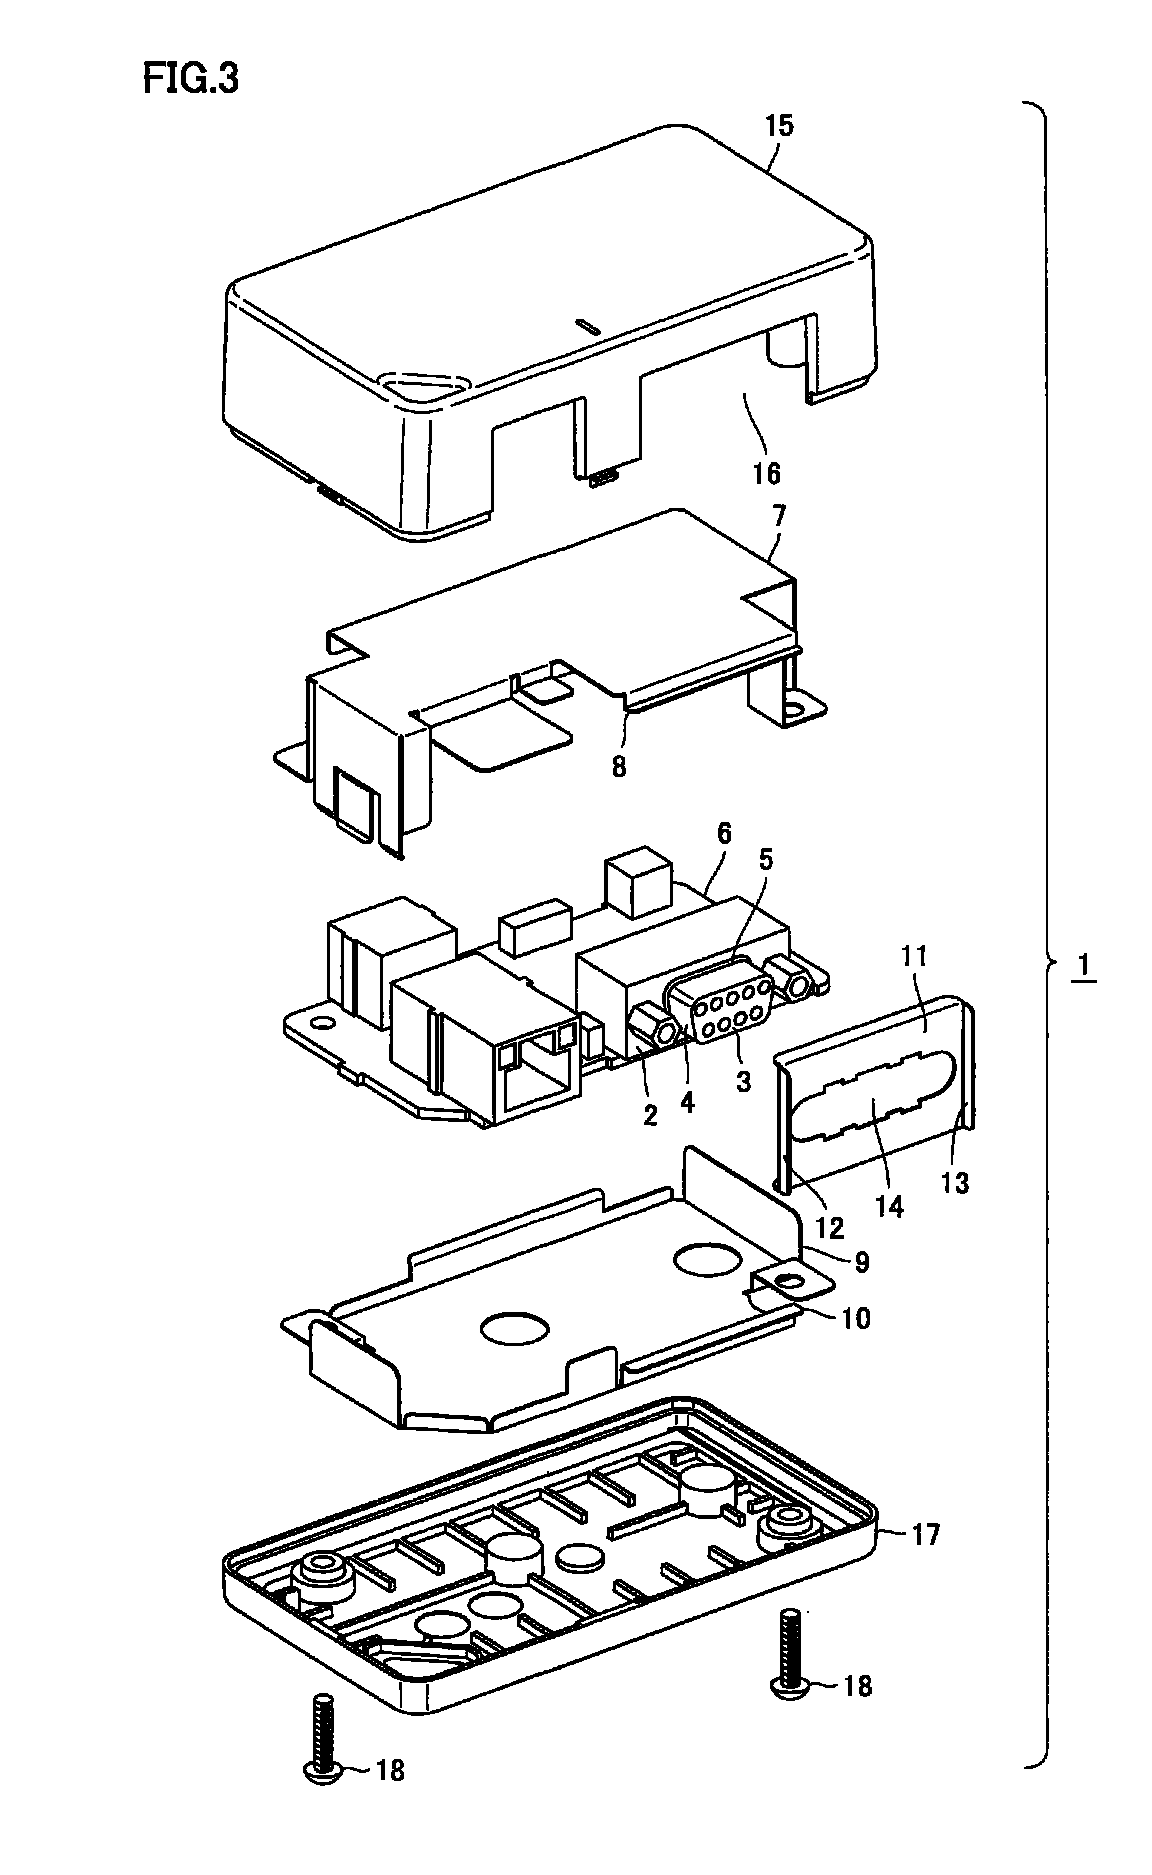 Electromagnetic shield structure of electronics housing